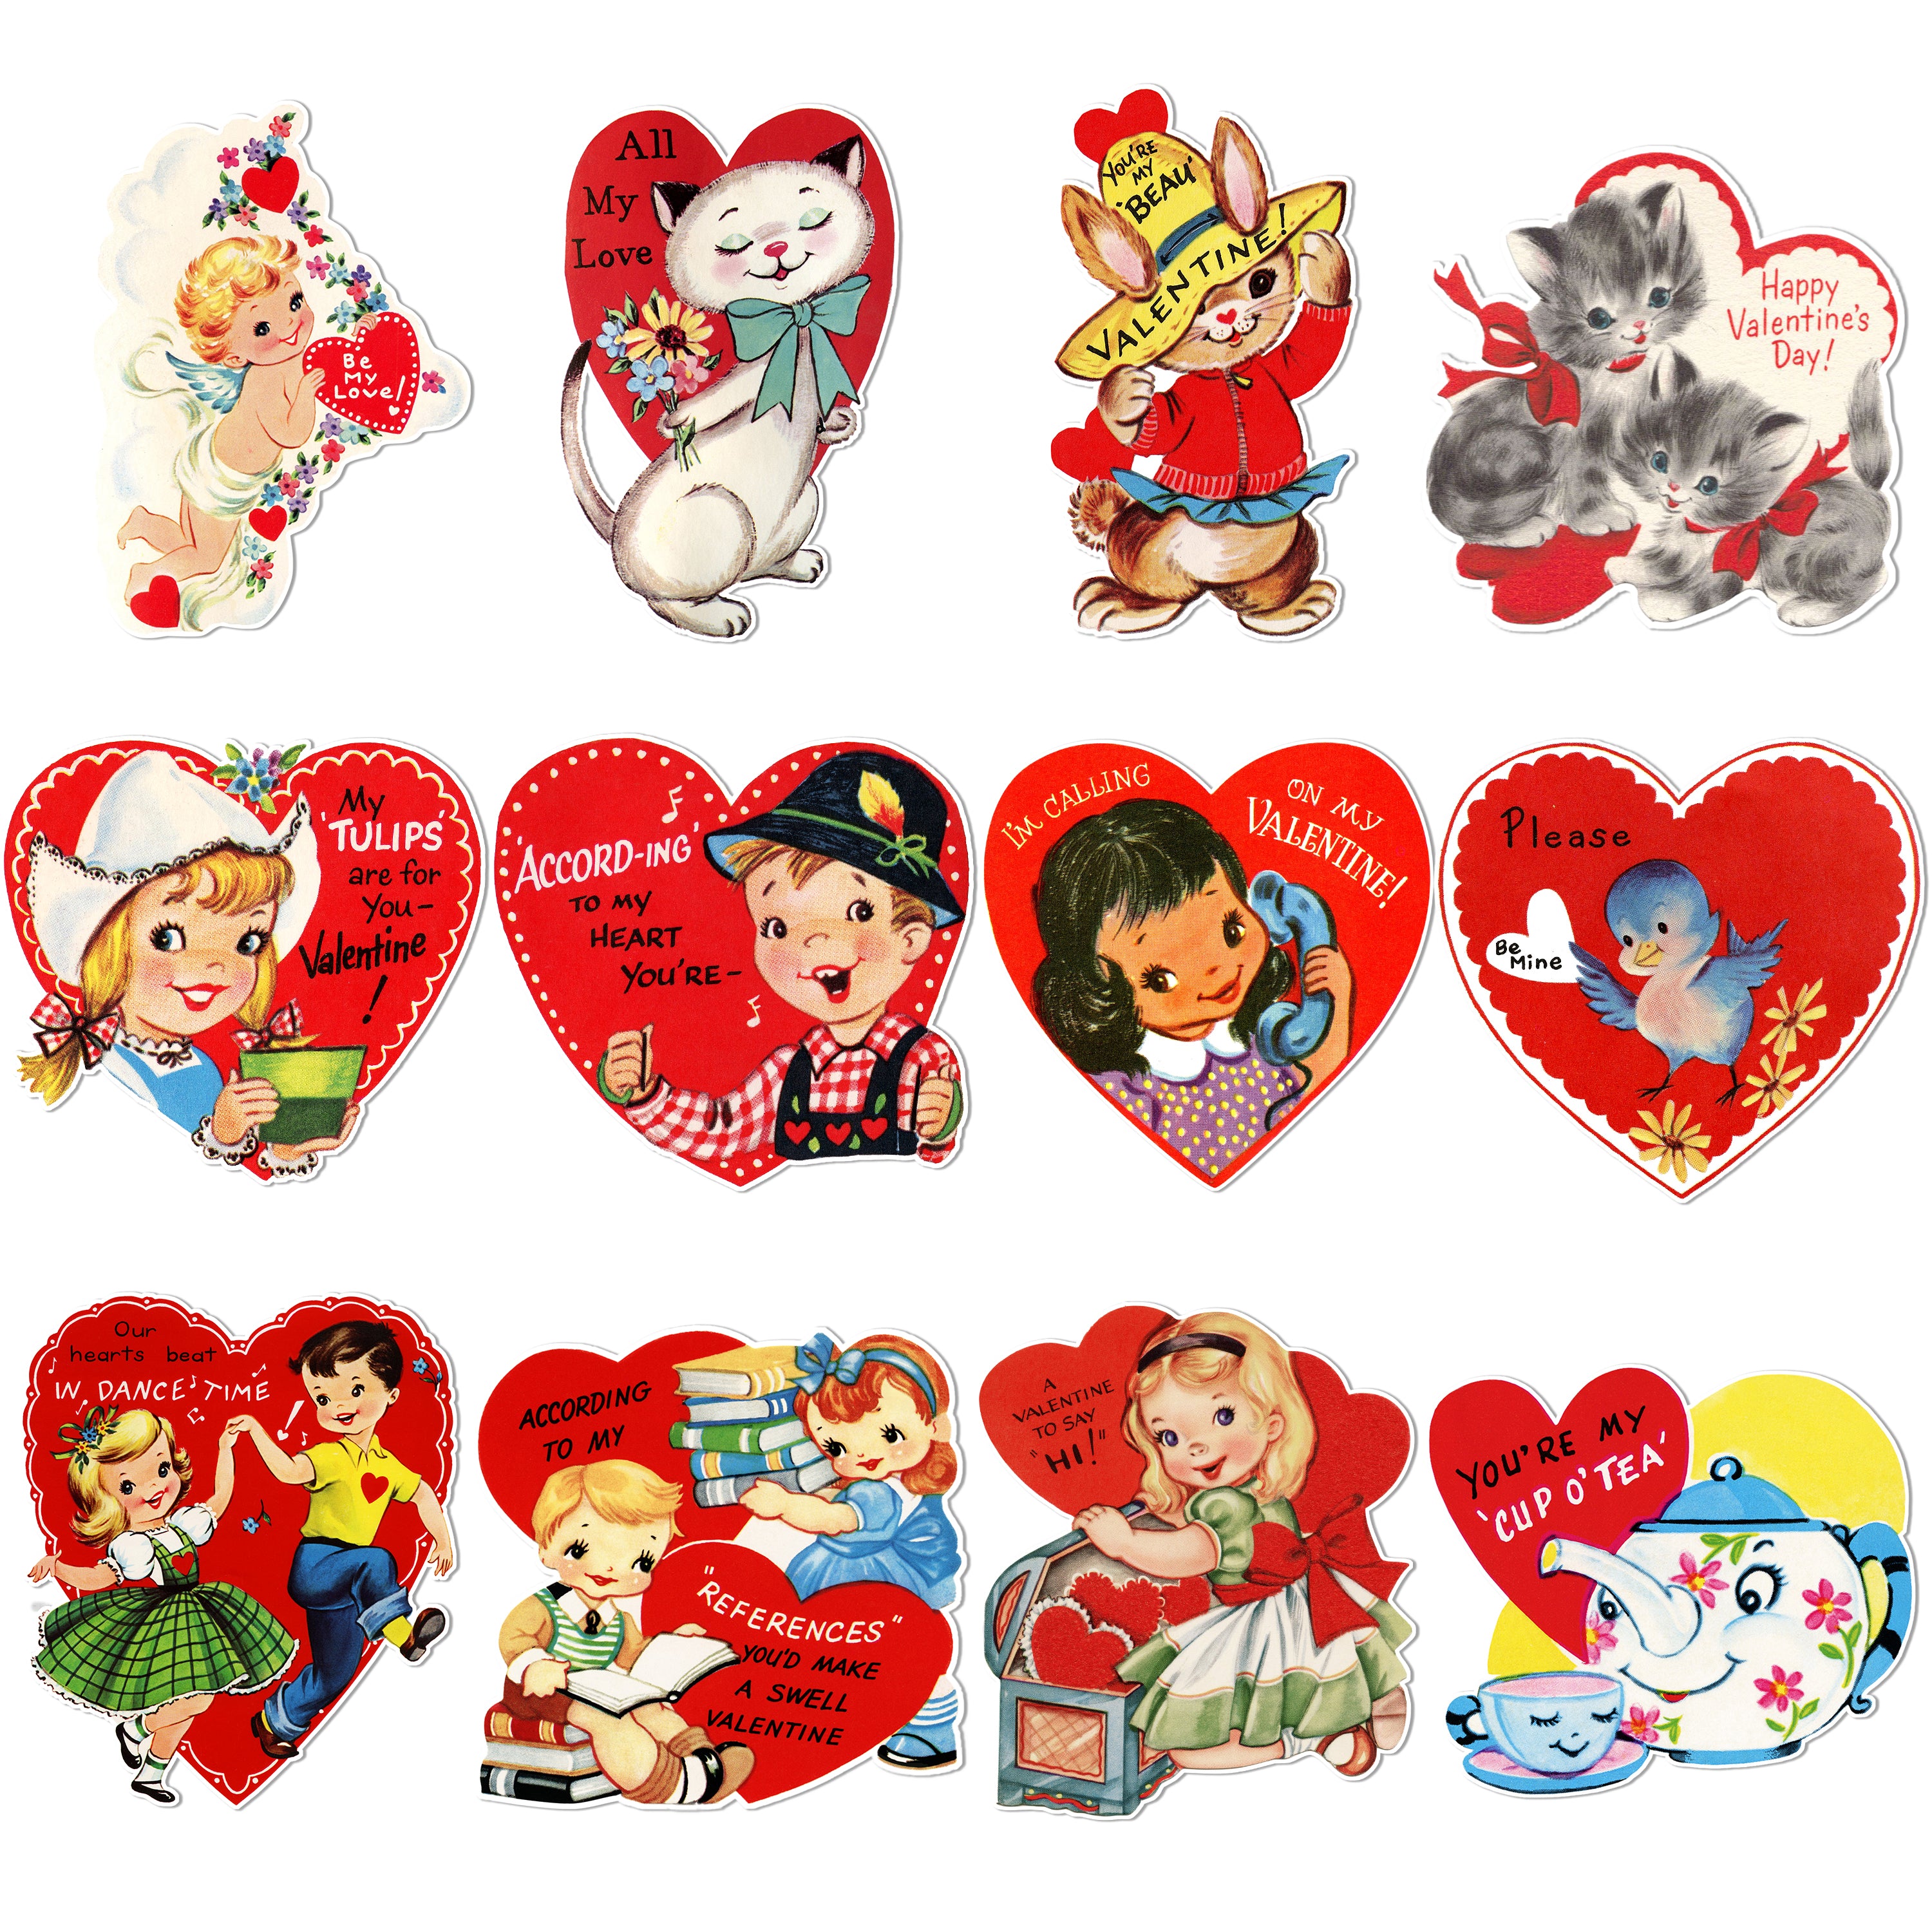 Buy Valentines Day Cutouts - Assorted Sizes 14 Hearts - Cappel's